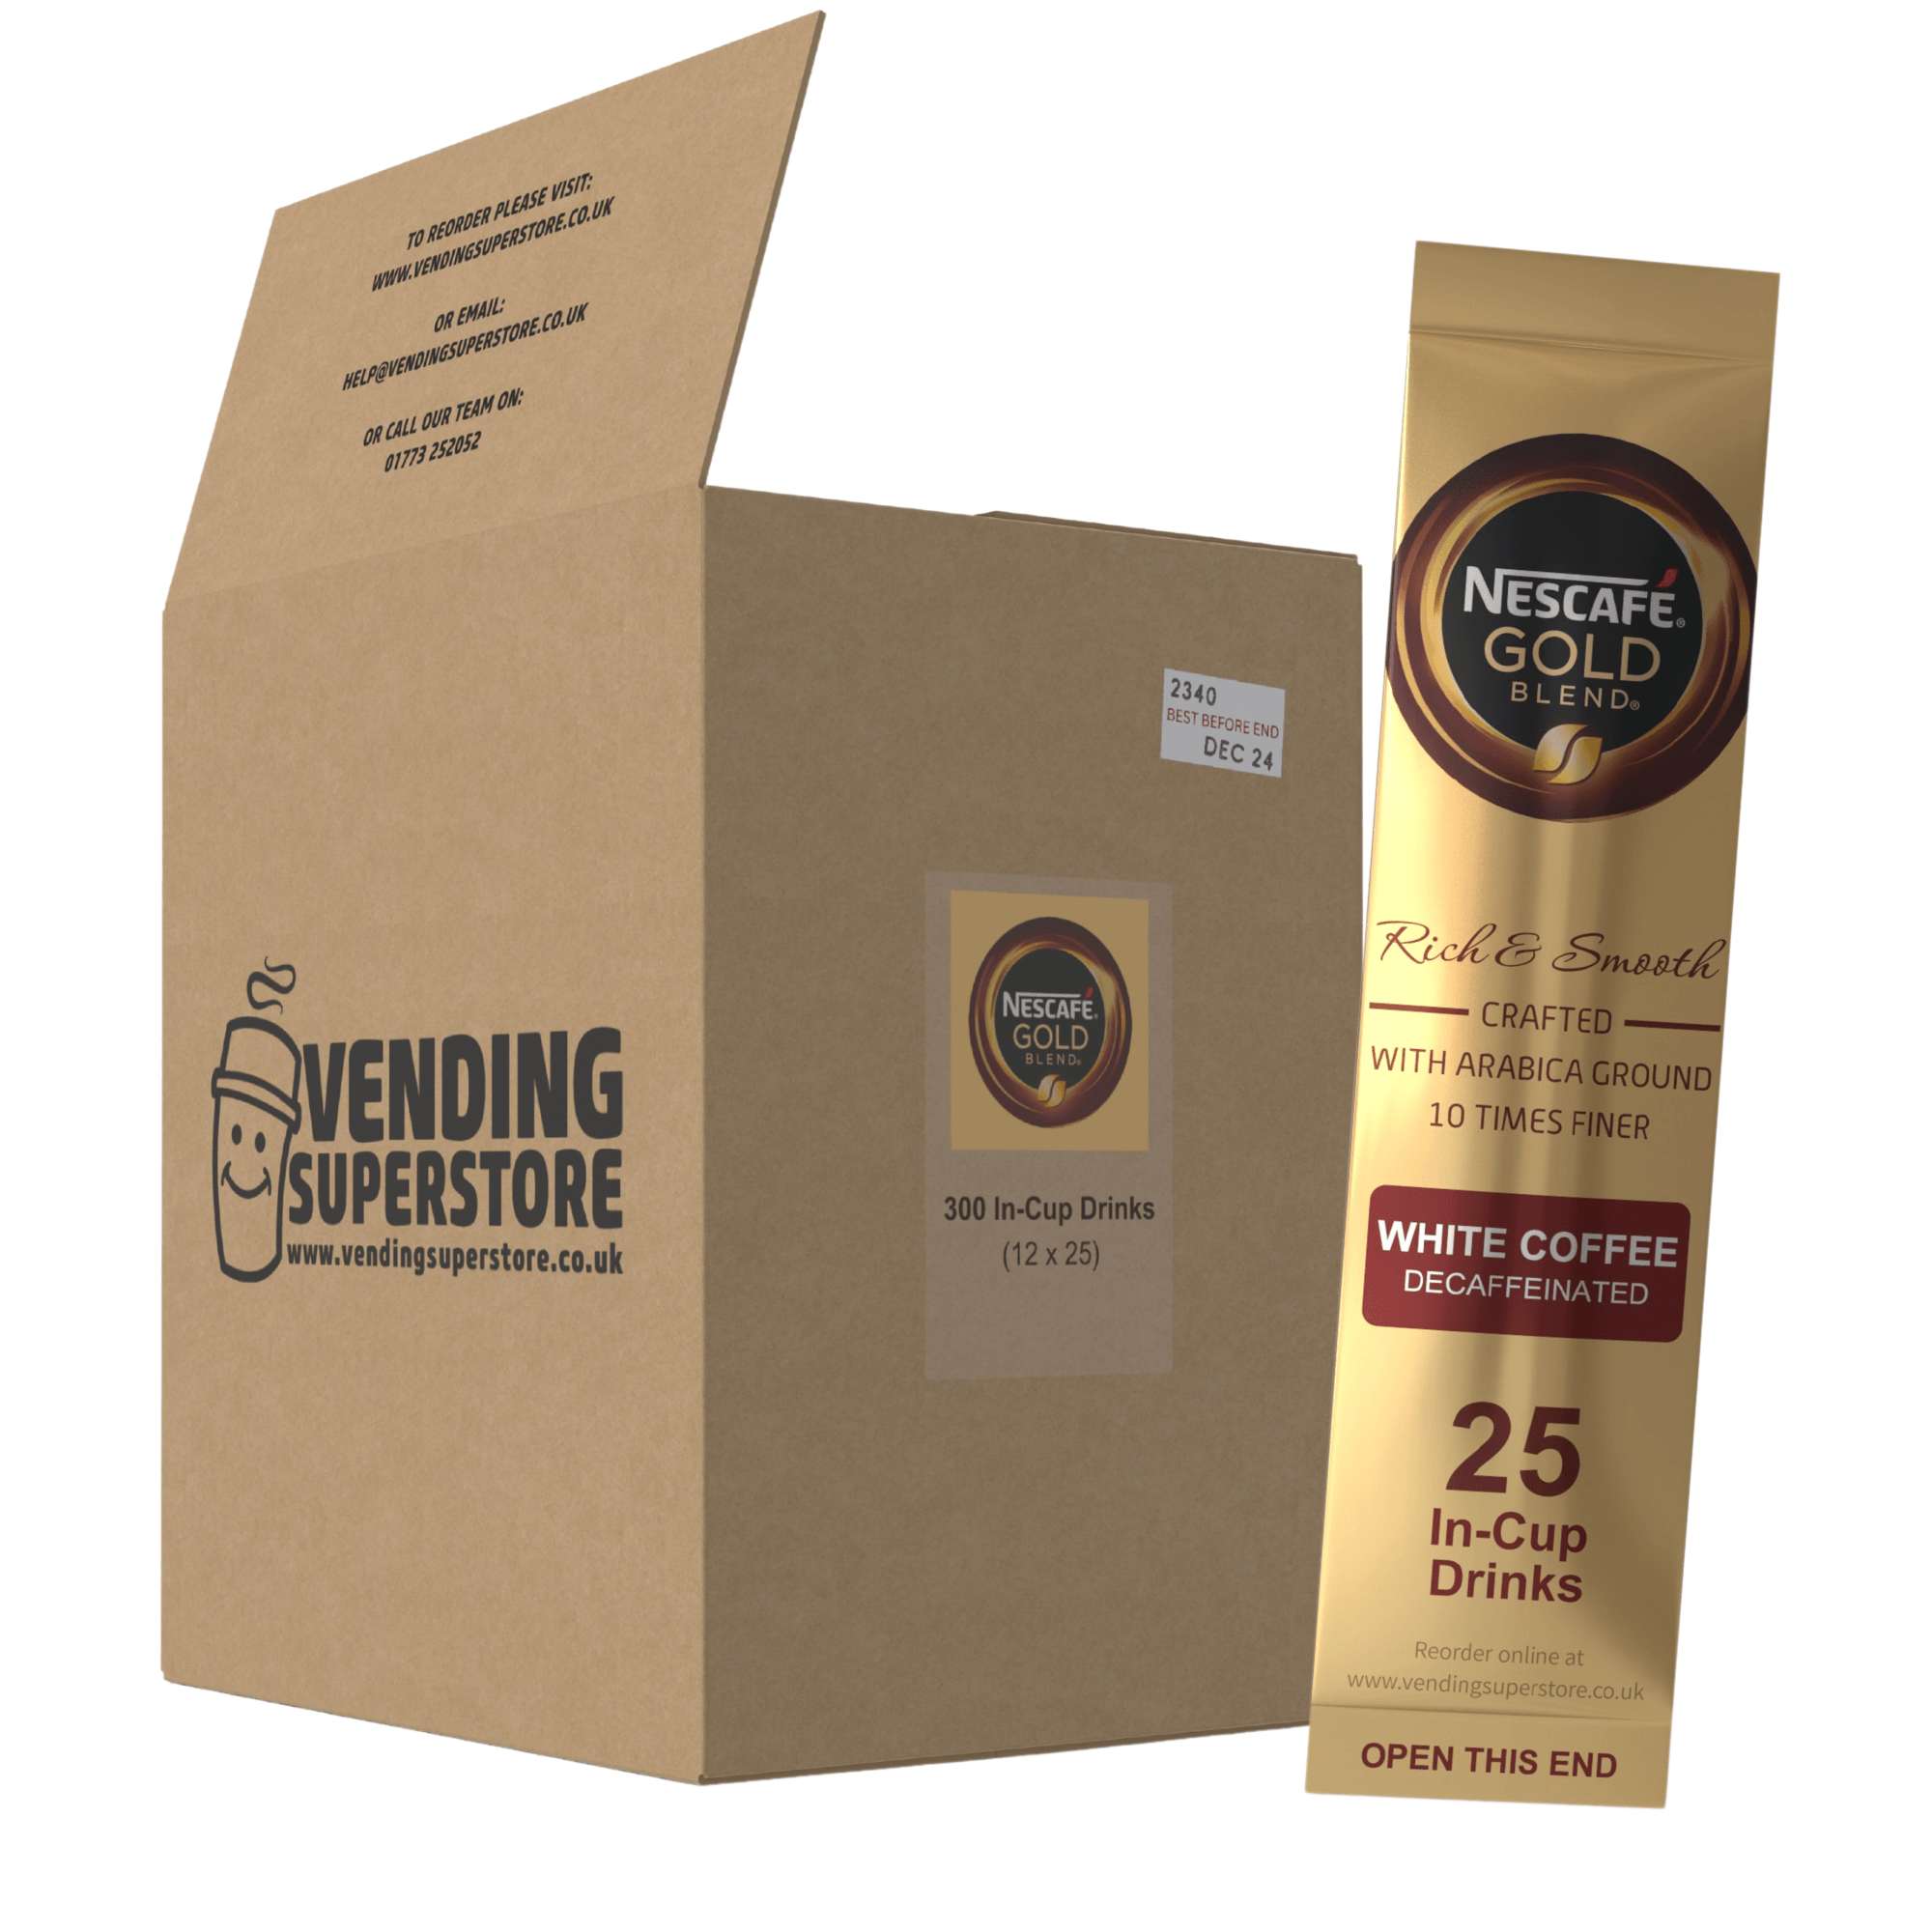 Incup Vending Drinks - Nescafe Gold Blend Decaff White Coffee - Case Of 300 Cups - Vending Superstore